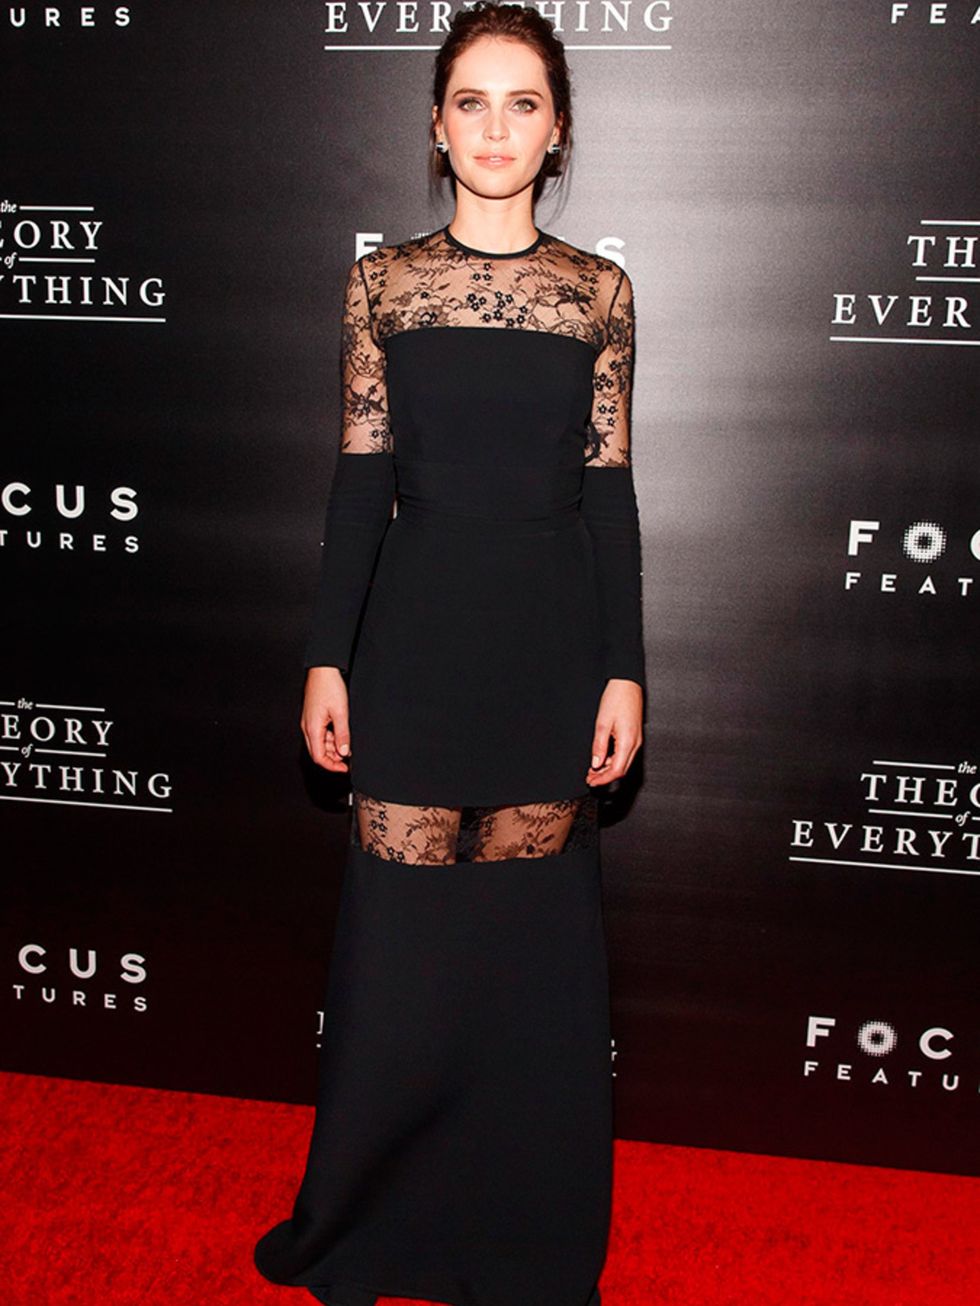 Felicity Jones wears Elie Saab to The Theory of Everything premiere in New York, October 2014.